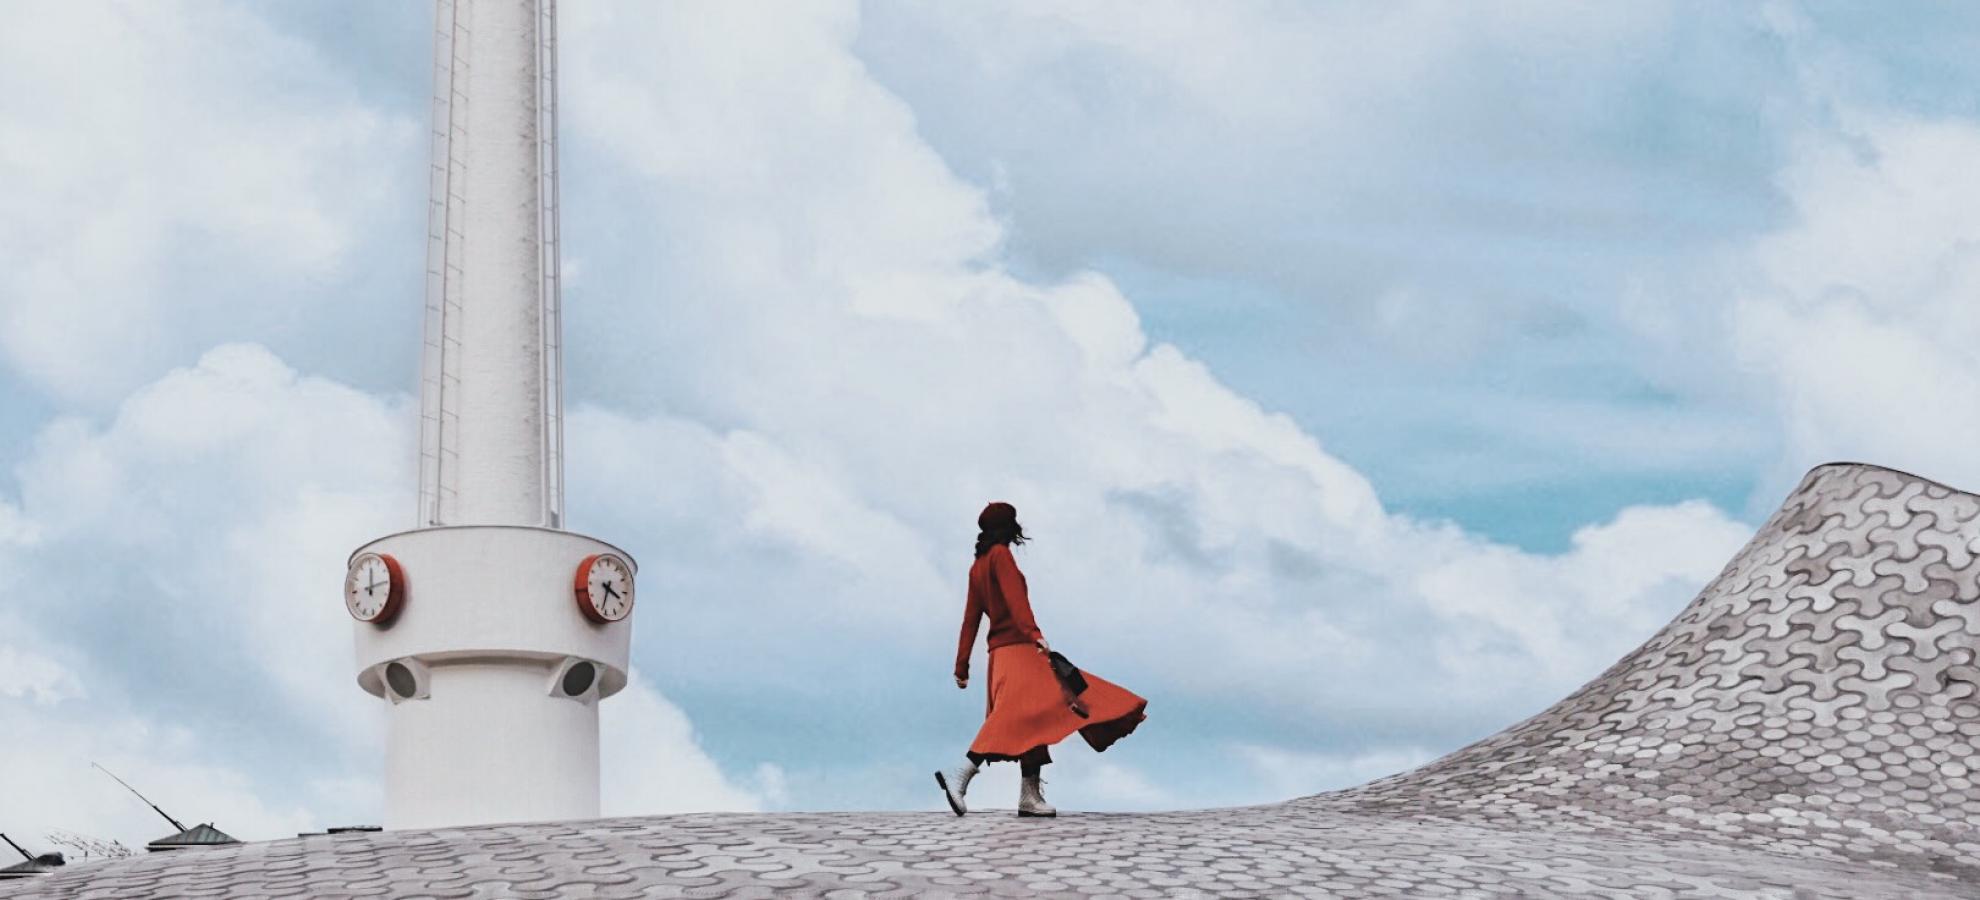 Silvia Rodríguez Bernal walking across the top of one of Amos Rex's skylight domes, the tower of Lasipalatsi standing to the left in front of a mostly cloudy sky.